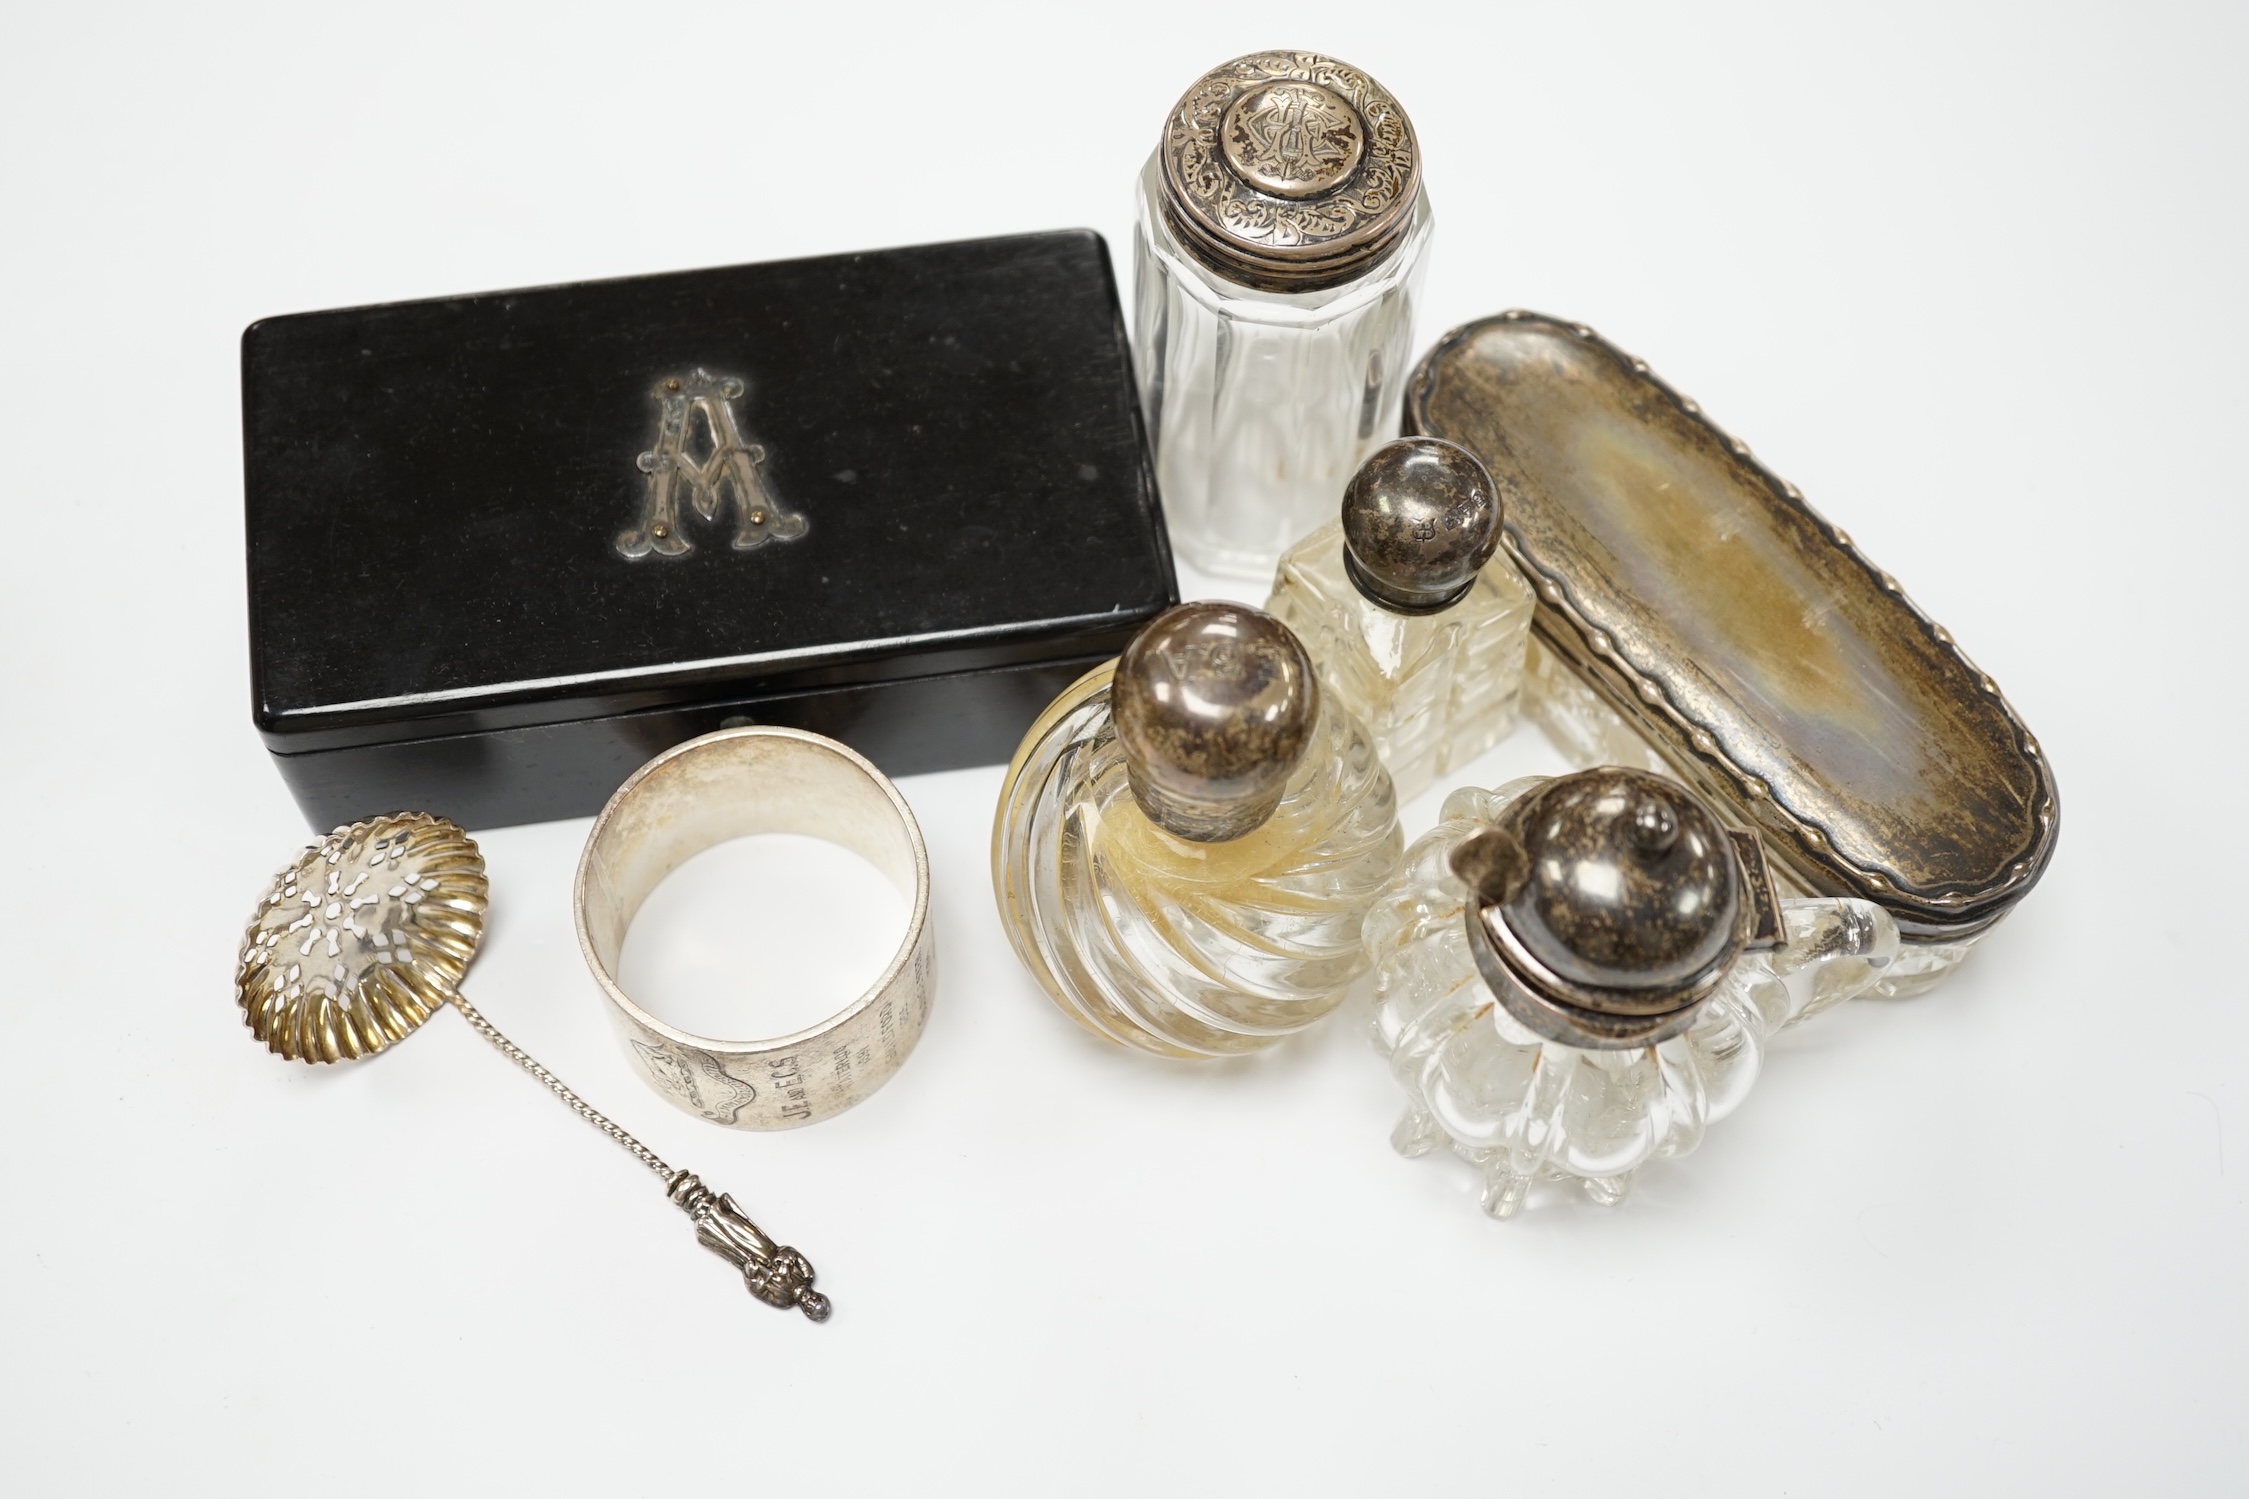 Four assorted silver mounted glass toilet jars, an Edwardian silver mounted glass mustard jar with spoon, a silver napkin ring, sifter spoon and ebony box. Condition - poor to fair